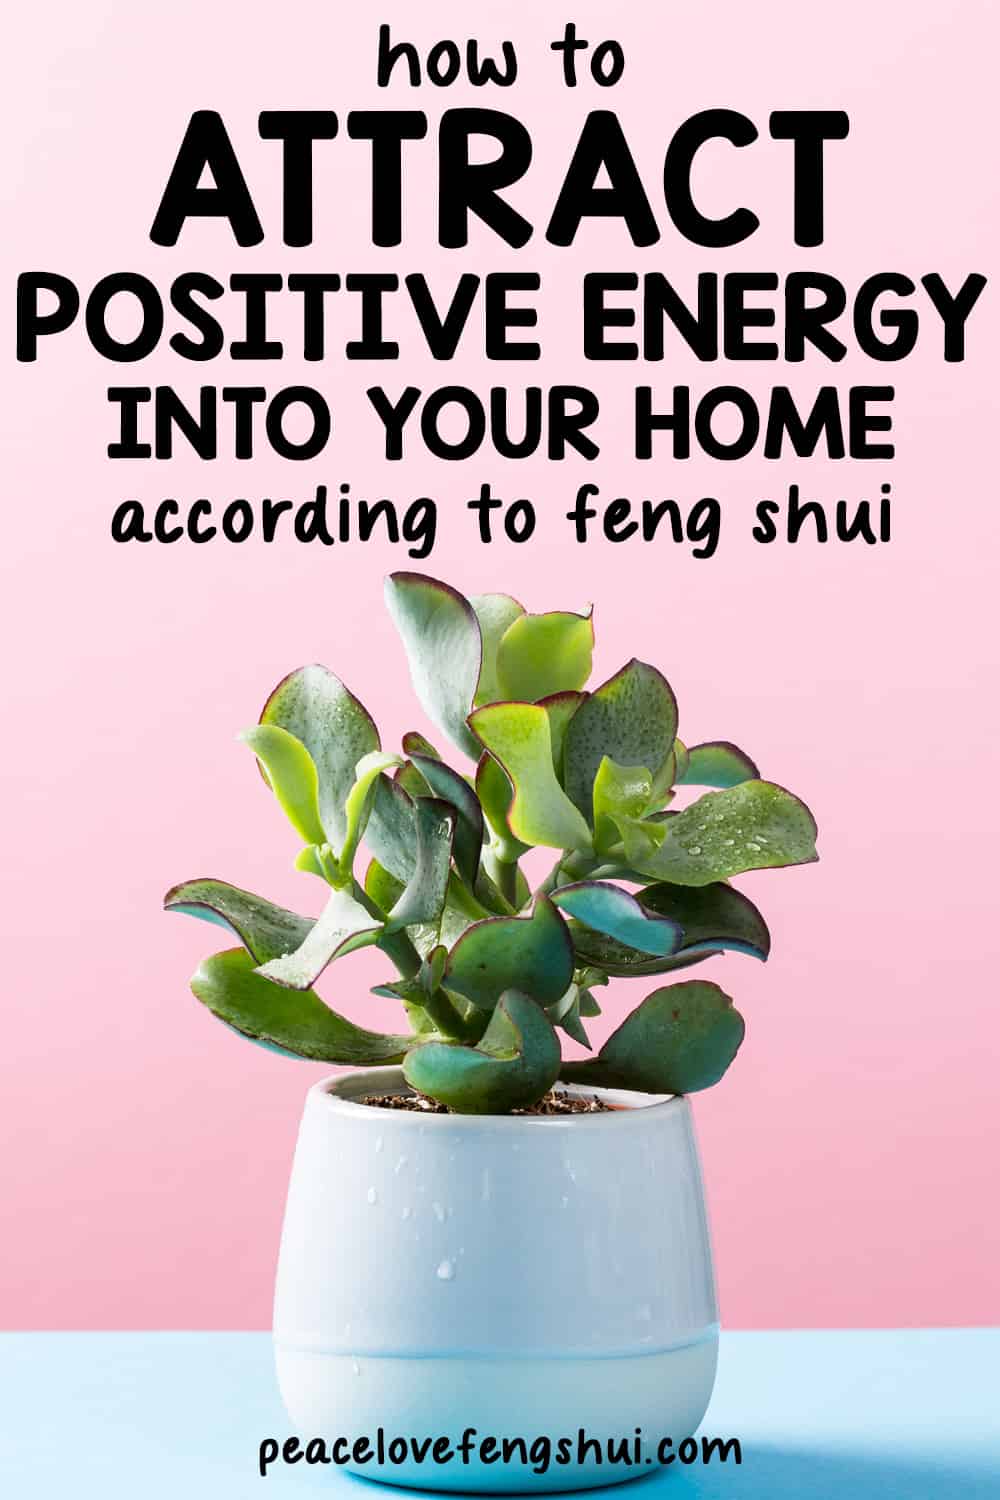 jade plant with text overlay that says: how to attract positive energy into your home according to feng shui